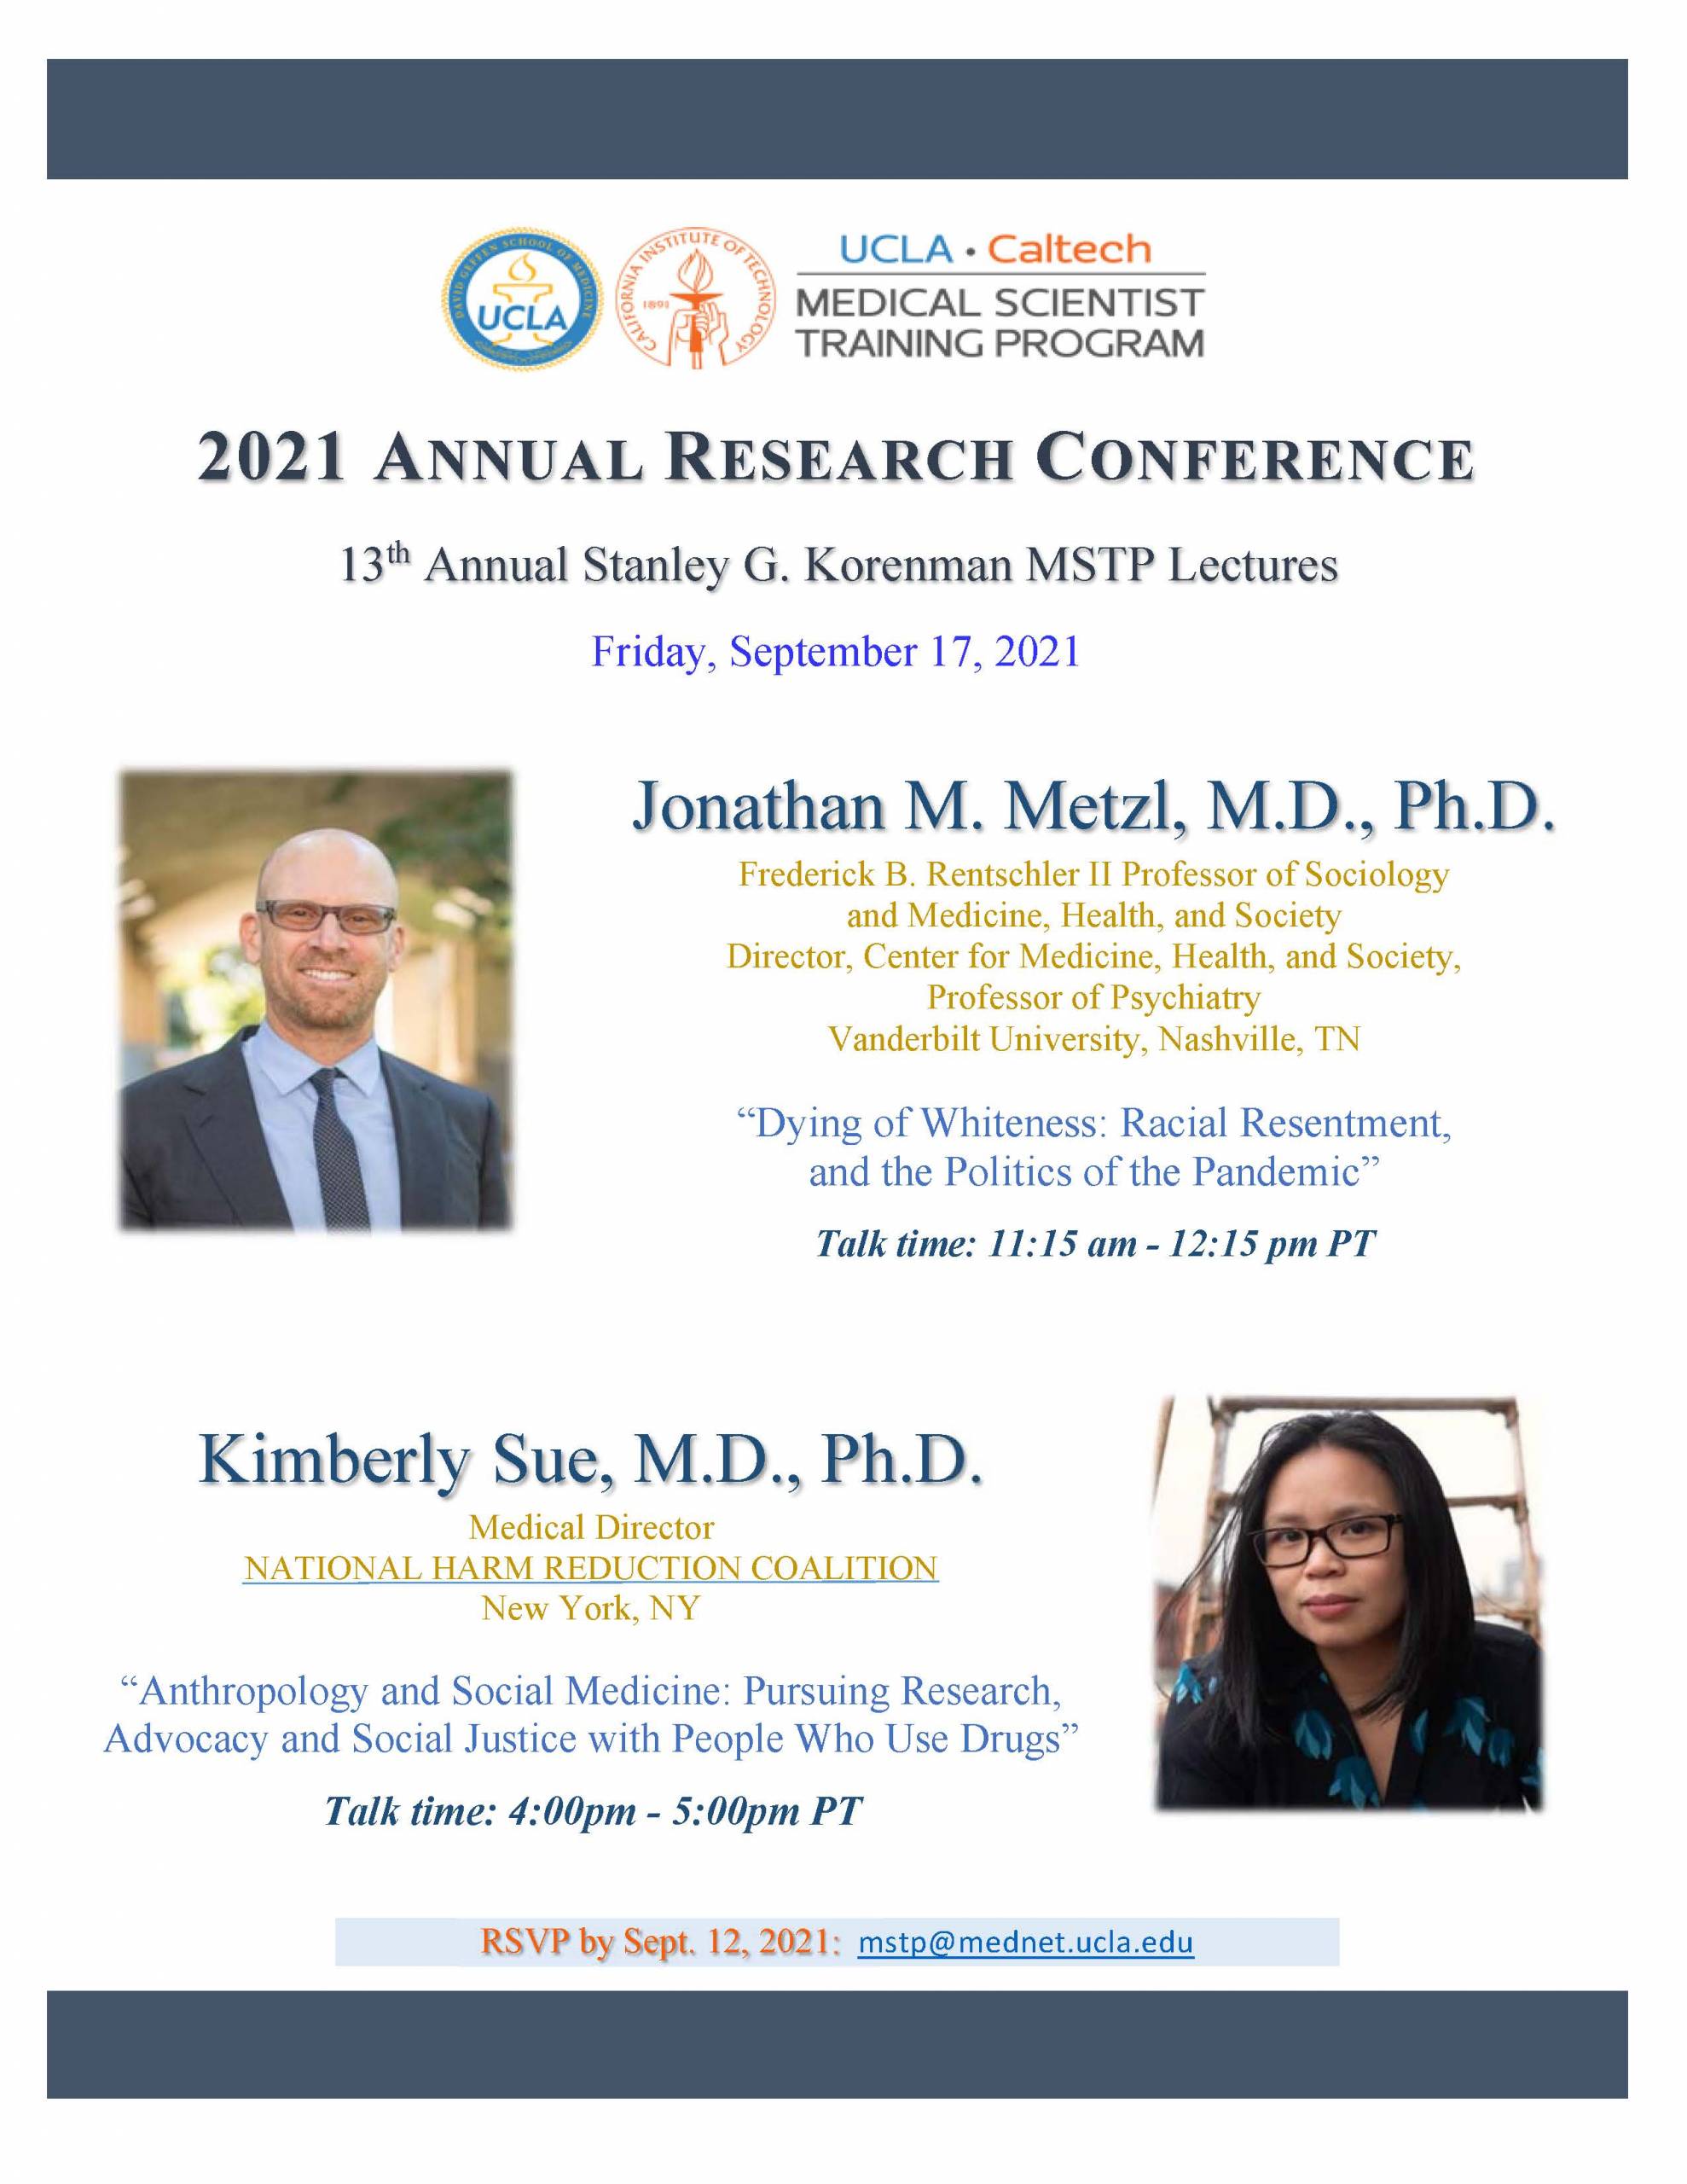 2021 Annual Research Conference